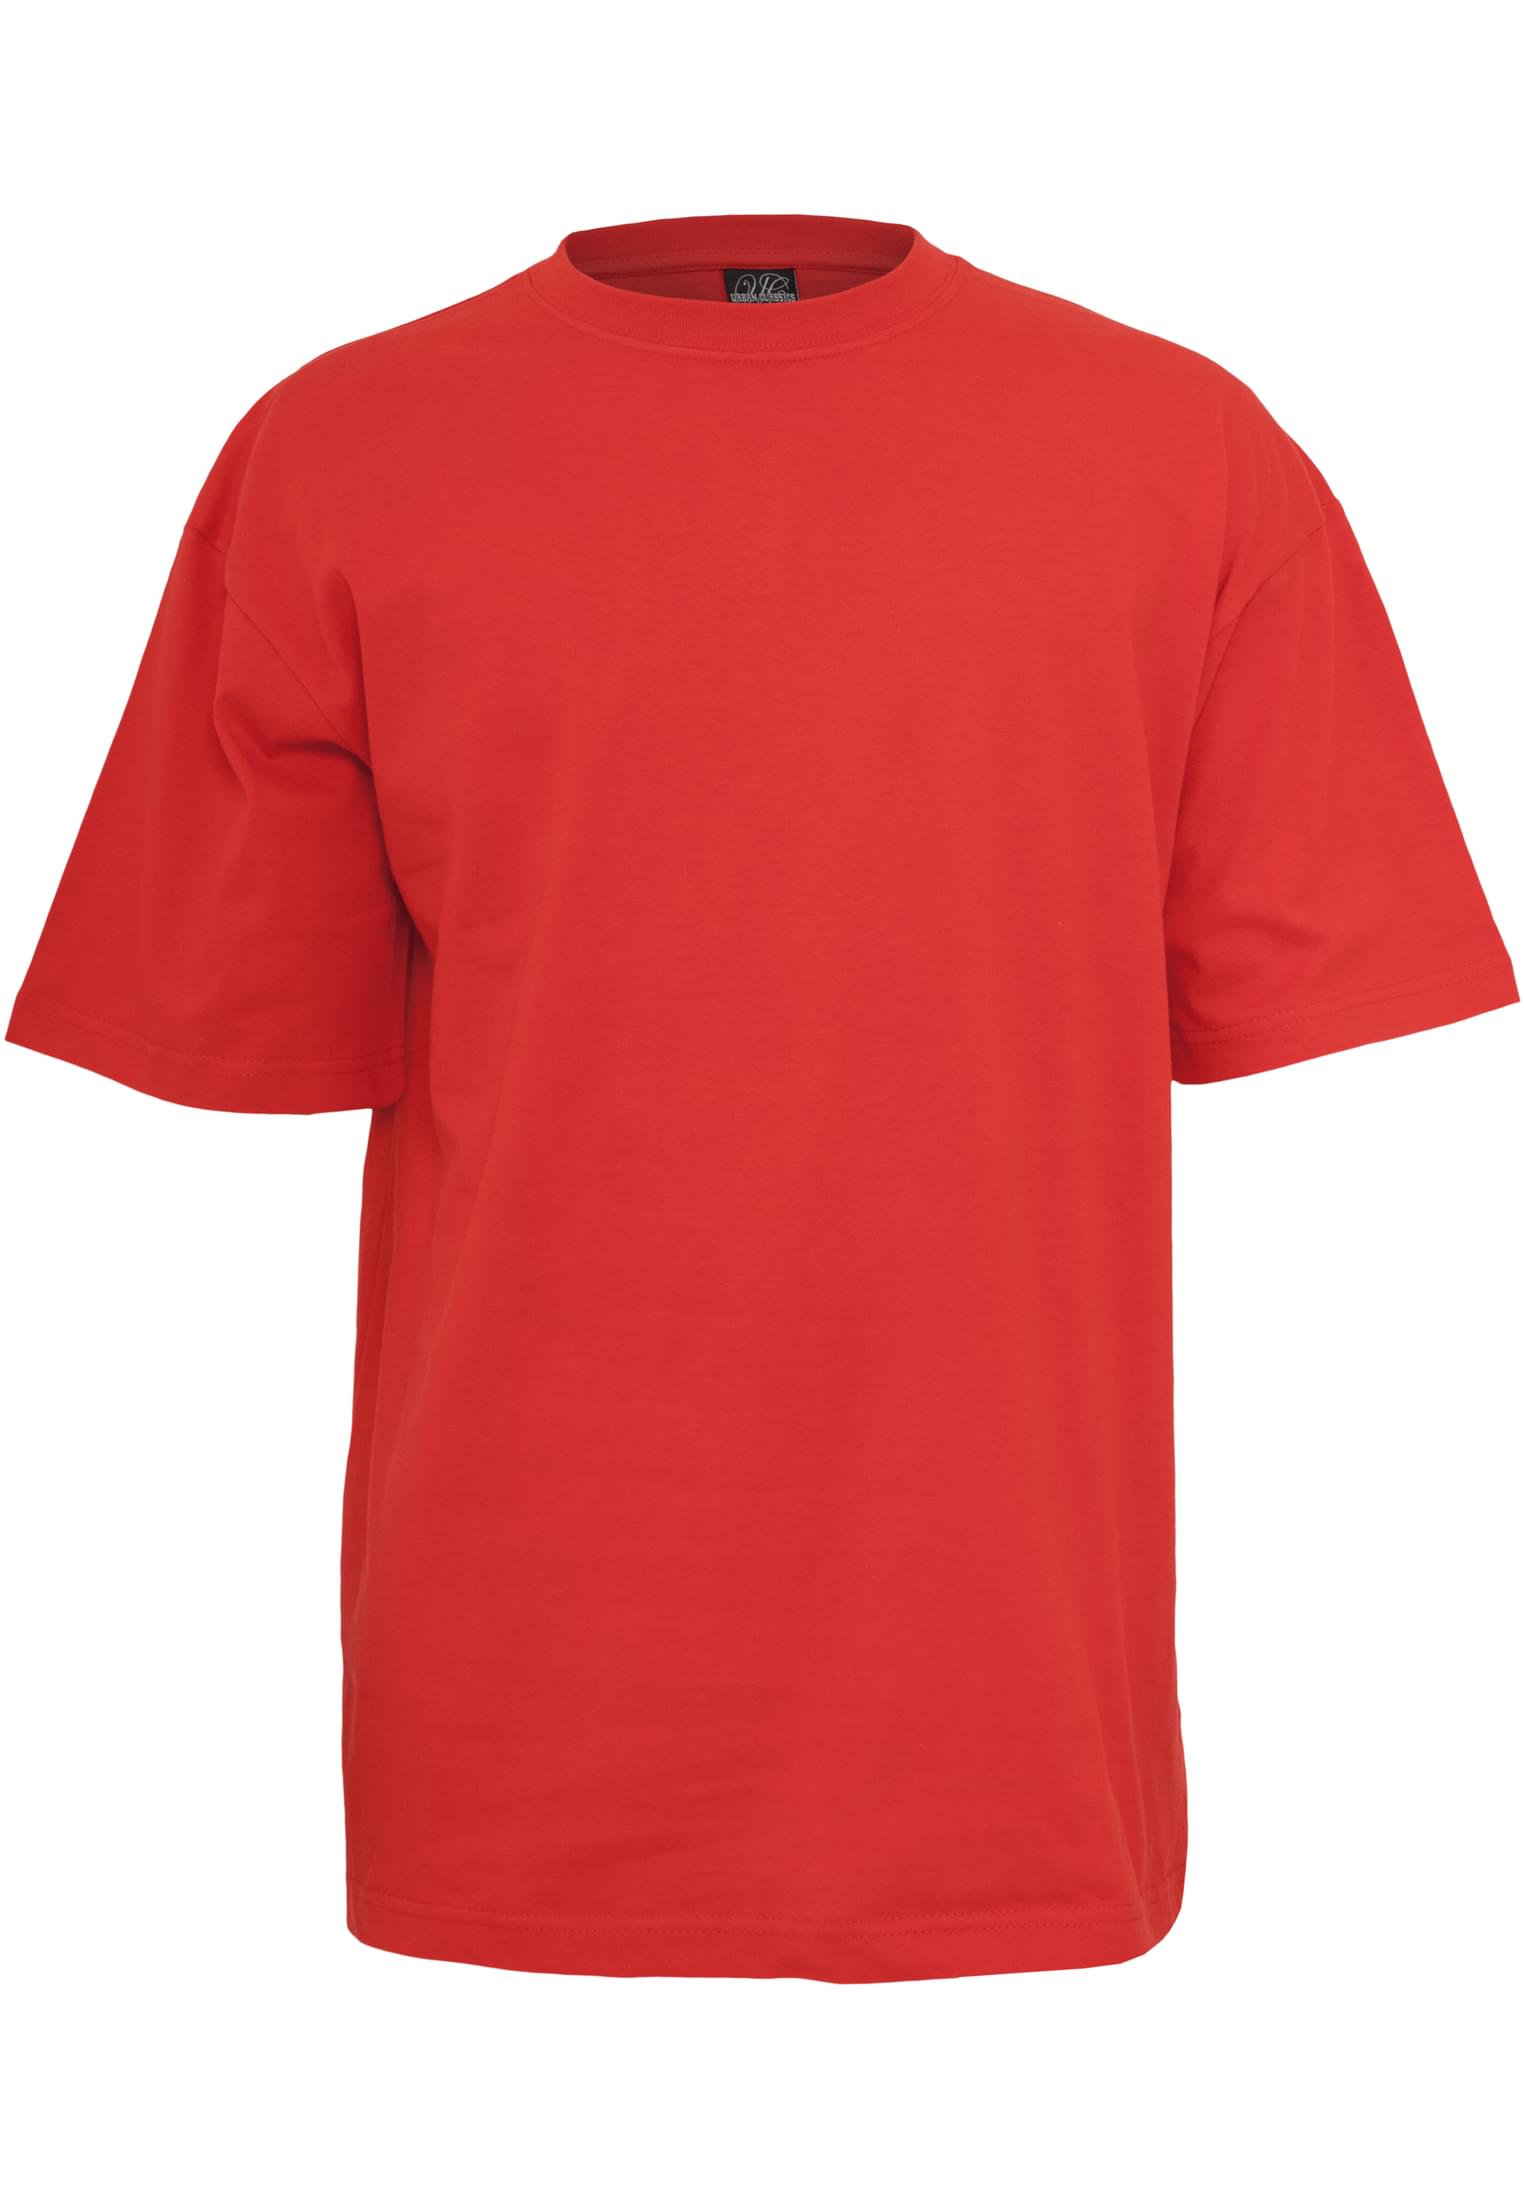 Plus Size Tall Tee in Farbe red